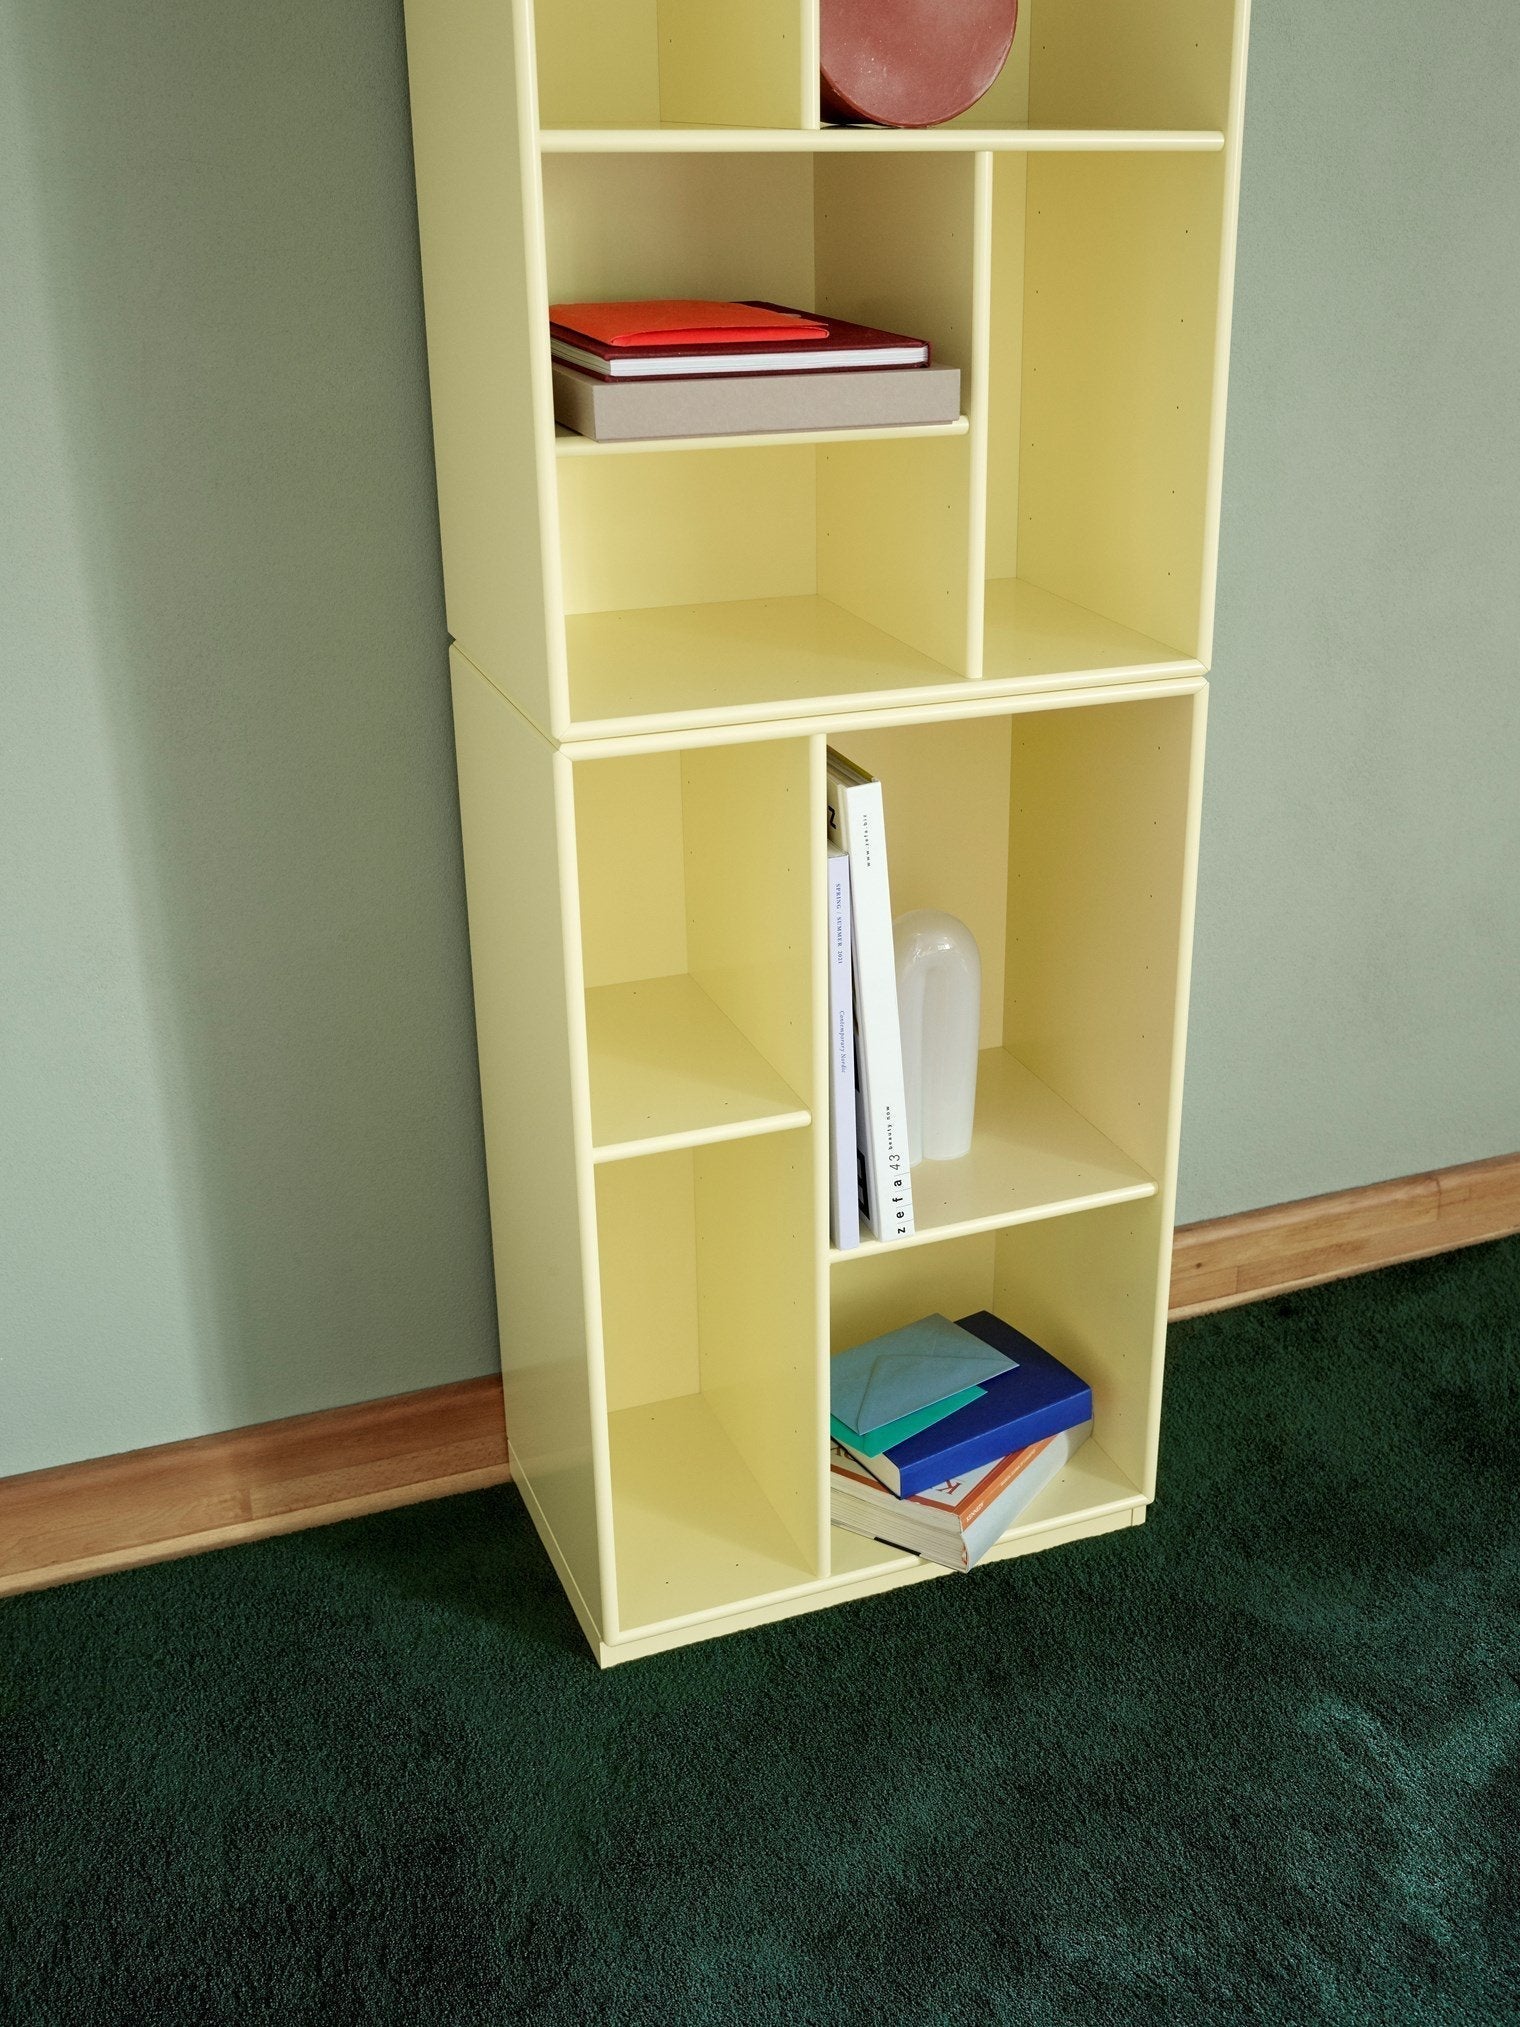 Montana Loom High Bookcase With 7 Cm Plinth, Pomelo Green